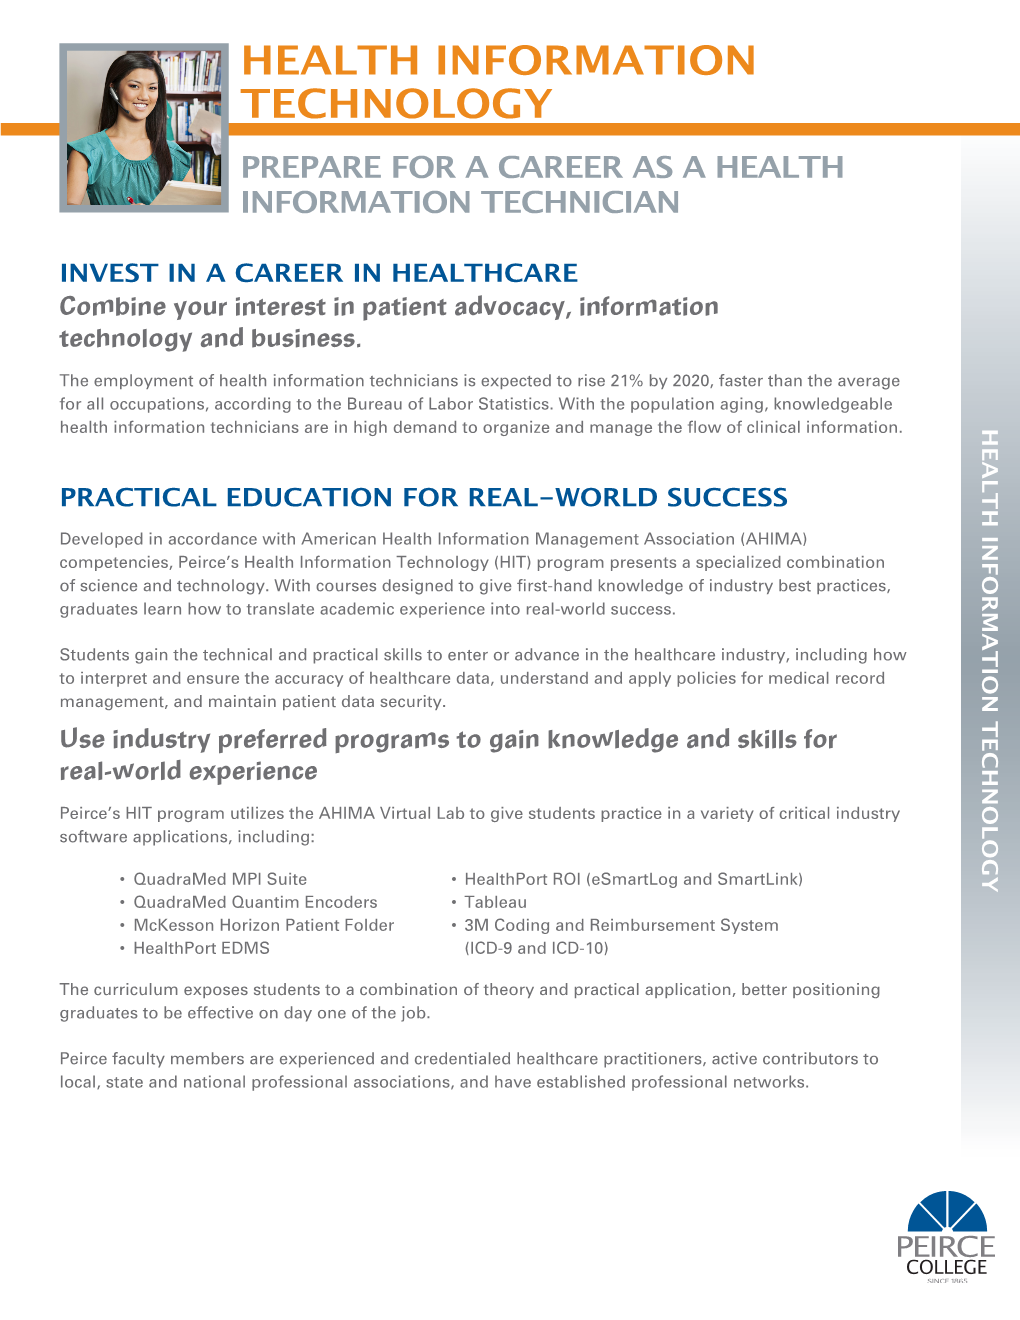 Health Information Technology Prepare for a Career As a Health Information Technician